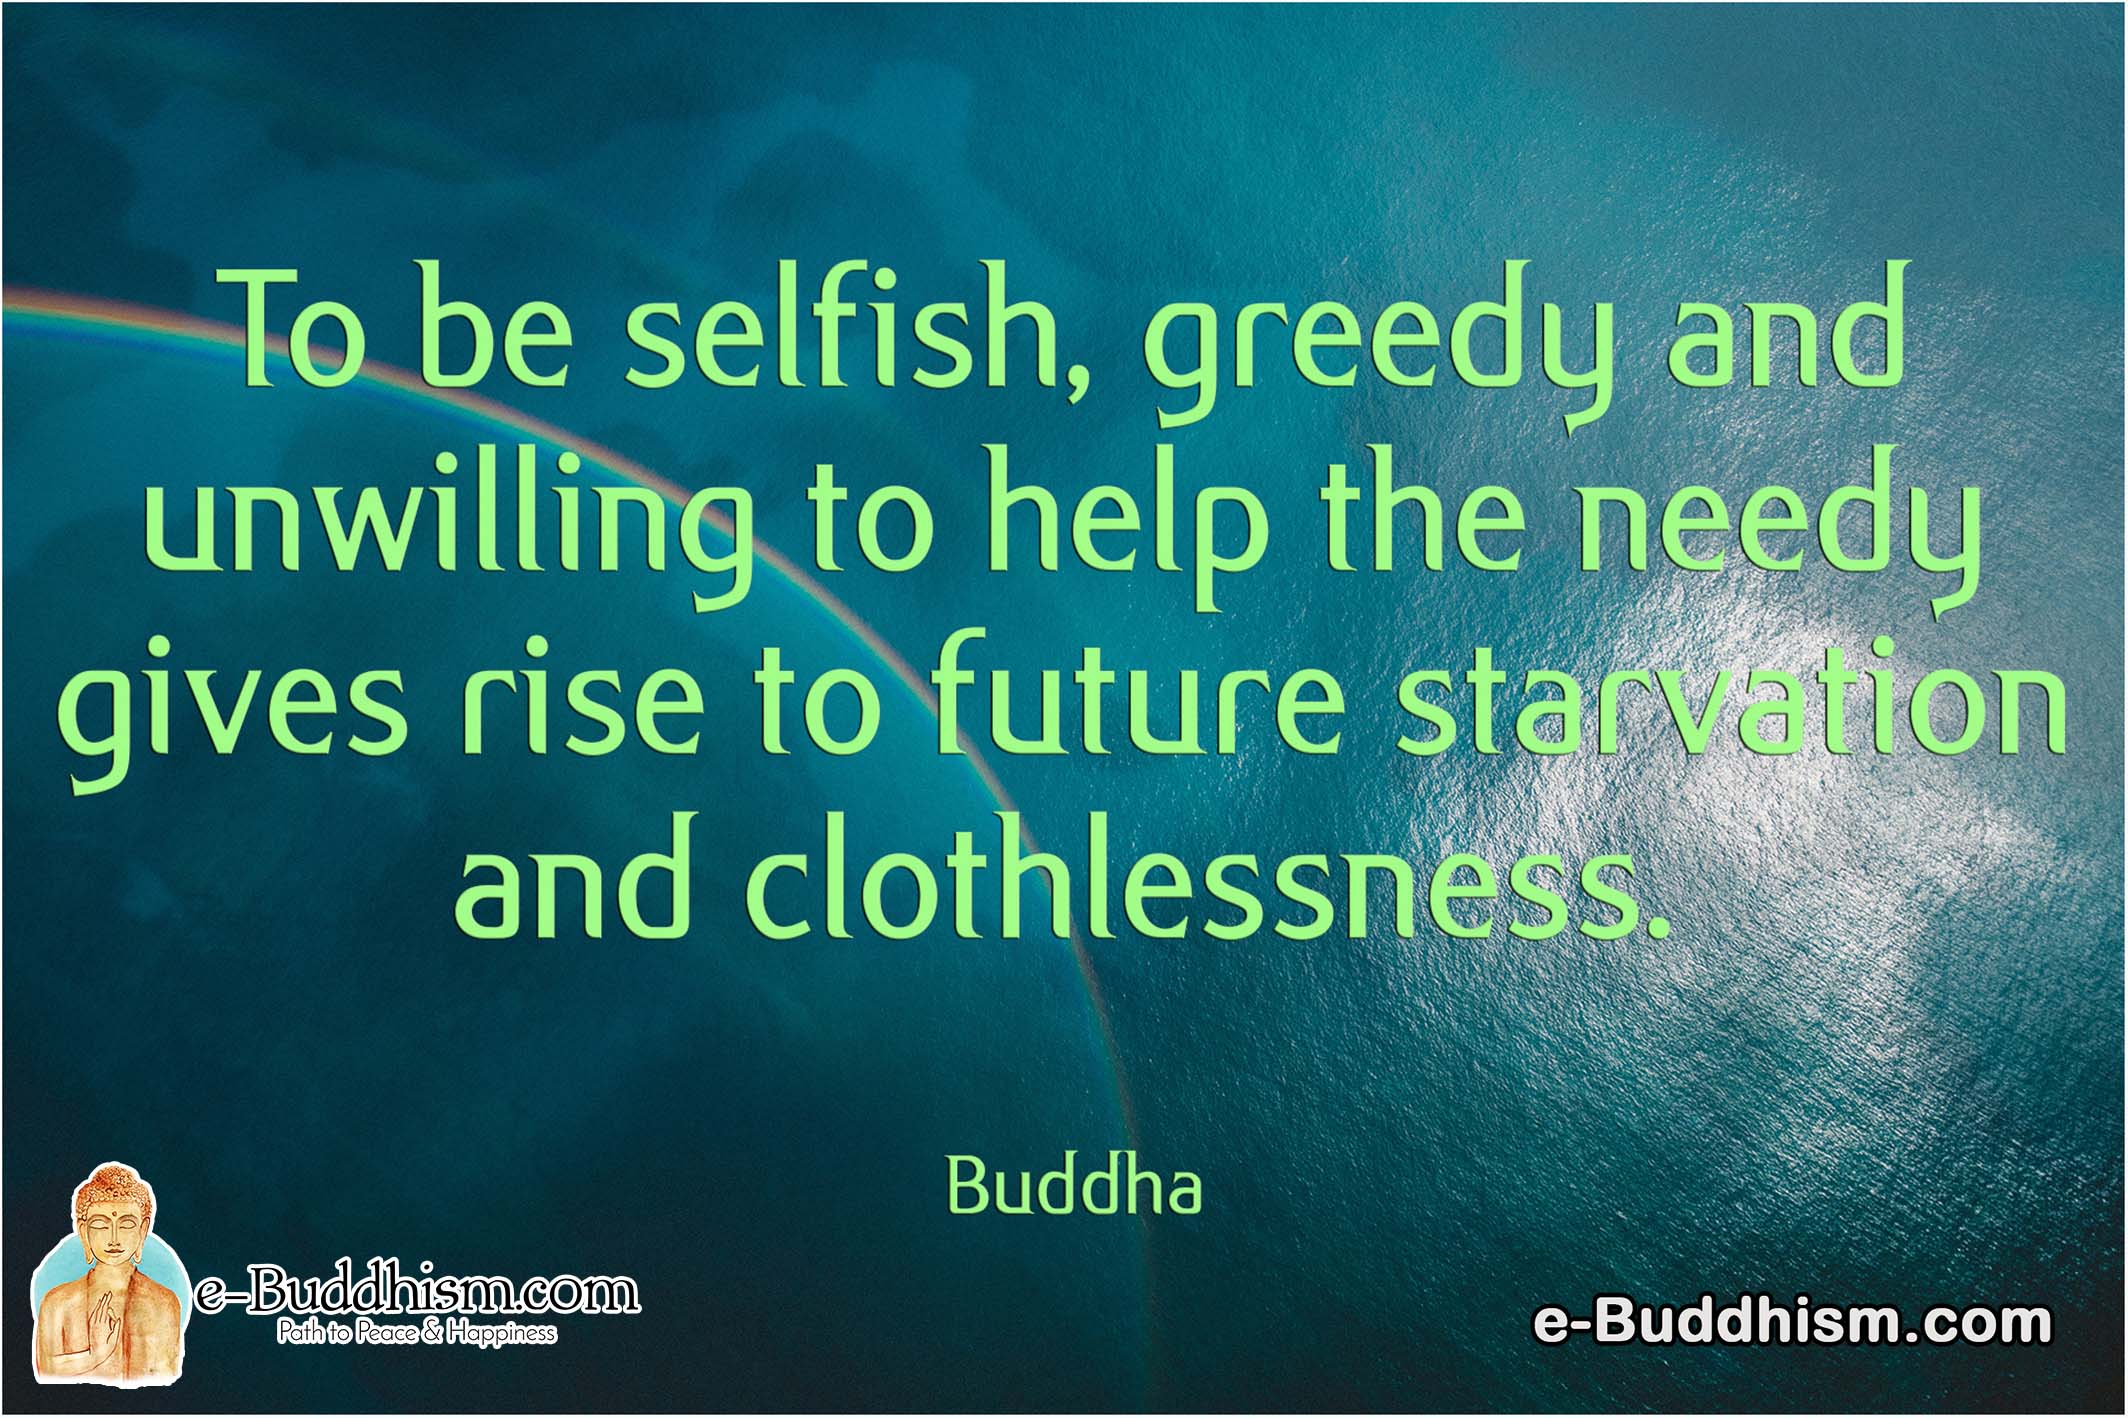 To be selfish, greedy and unwilling to help the needy gives rise to future starvation and clothlessness. -Buddha